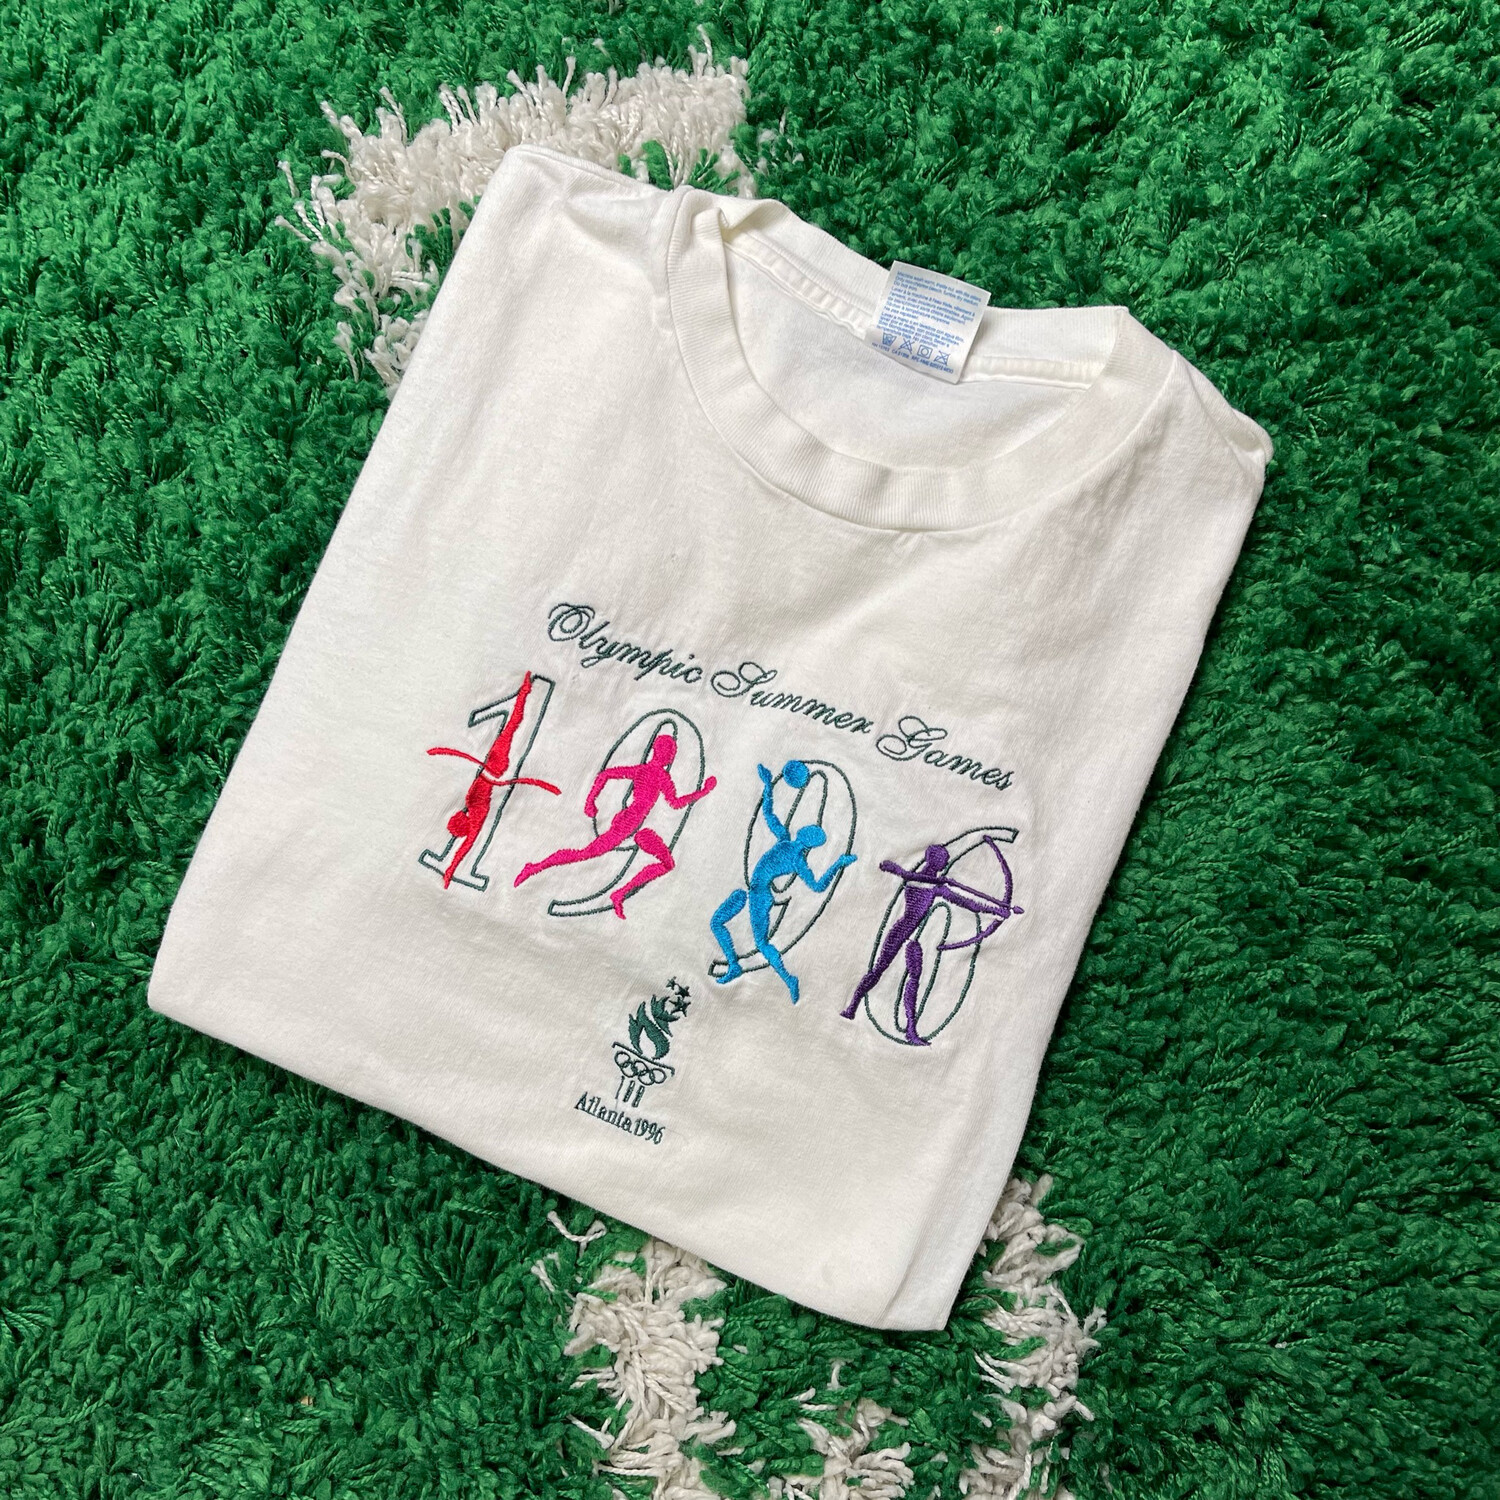 Olympic Summer Games 1996 White Tee Size Large